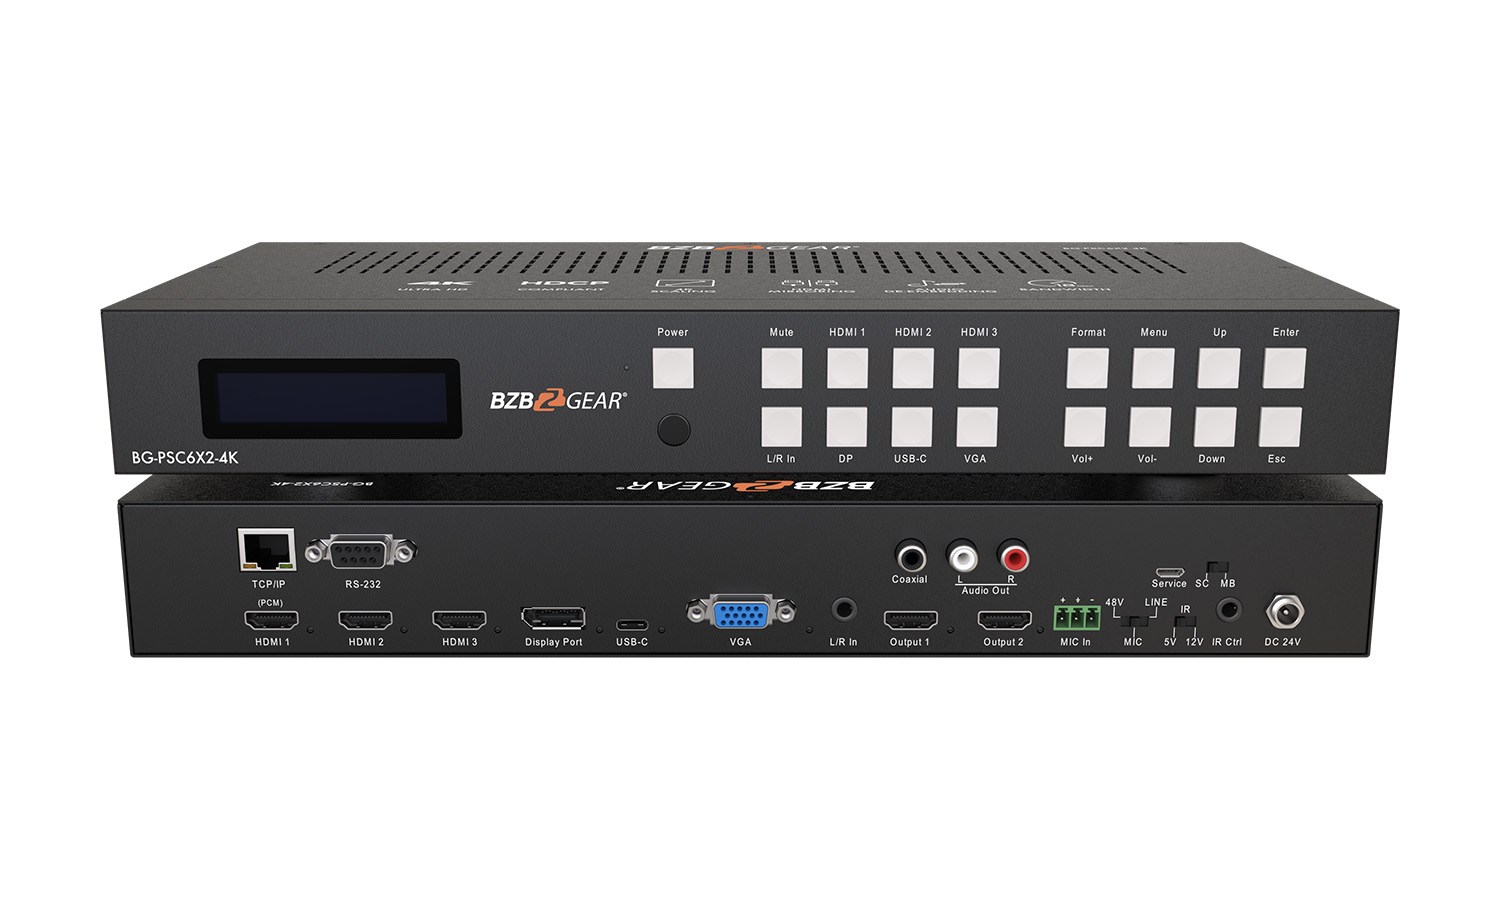 BG-PSC6x2-4K 6X2 4K 18Gbps UHD HDMI/USB-C/DP/VGA and Audio Conference Room Presentation Switcher/Scaler by BZBGEAR